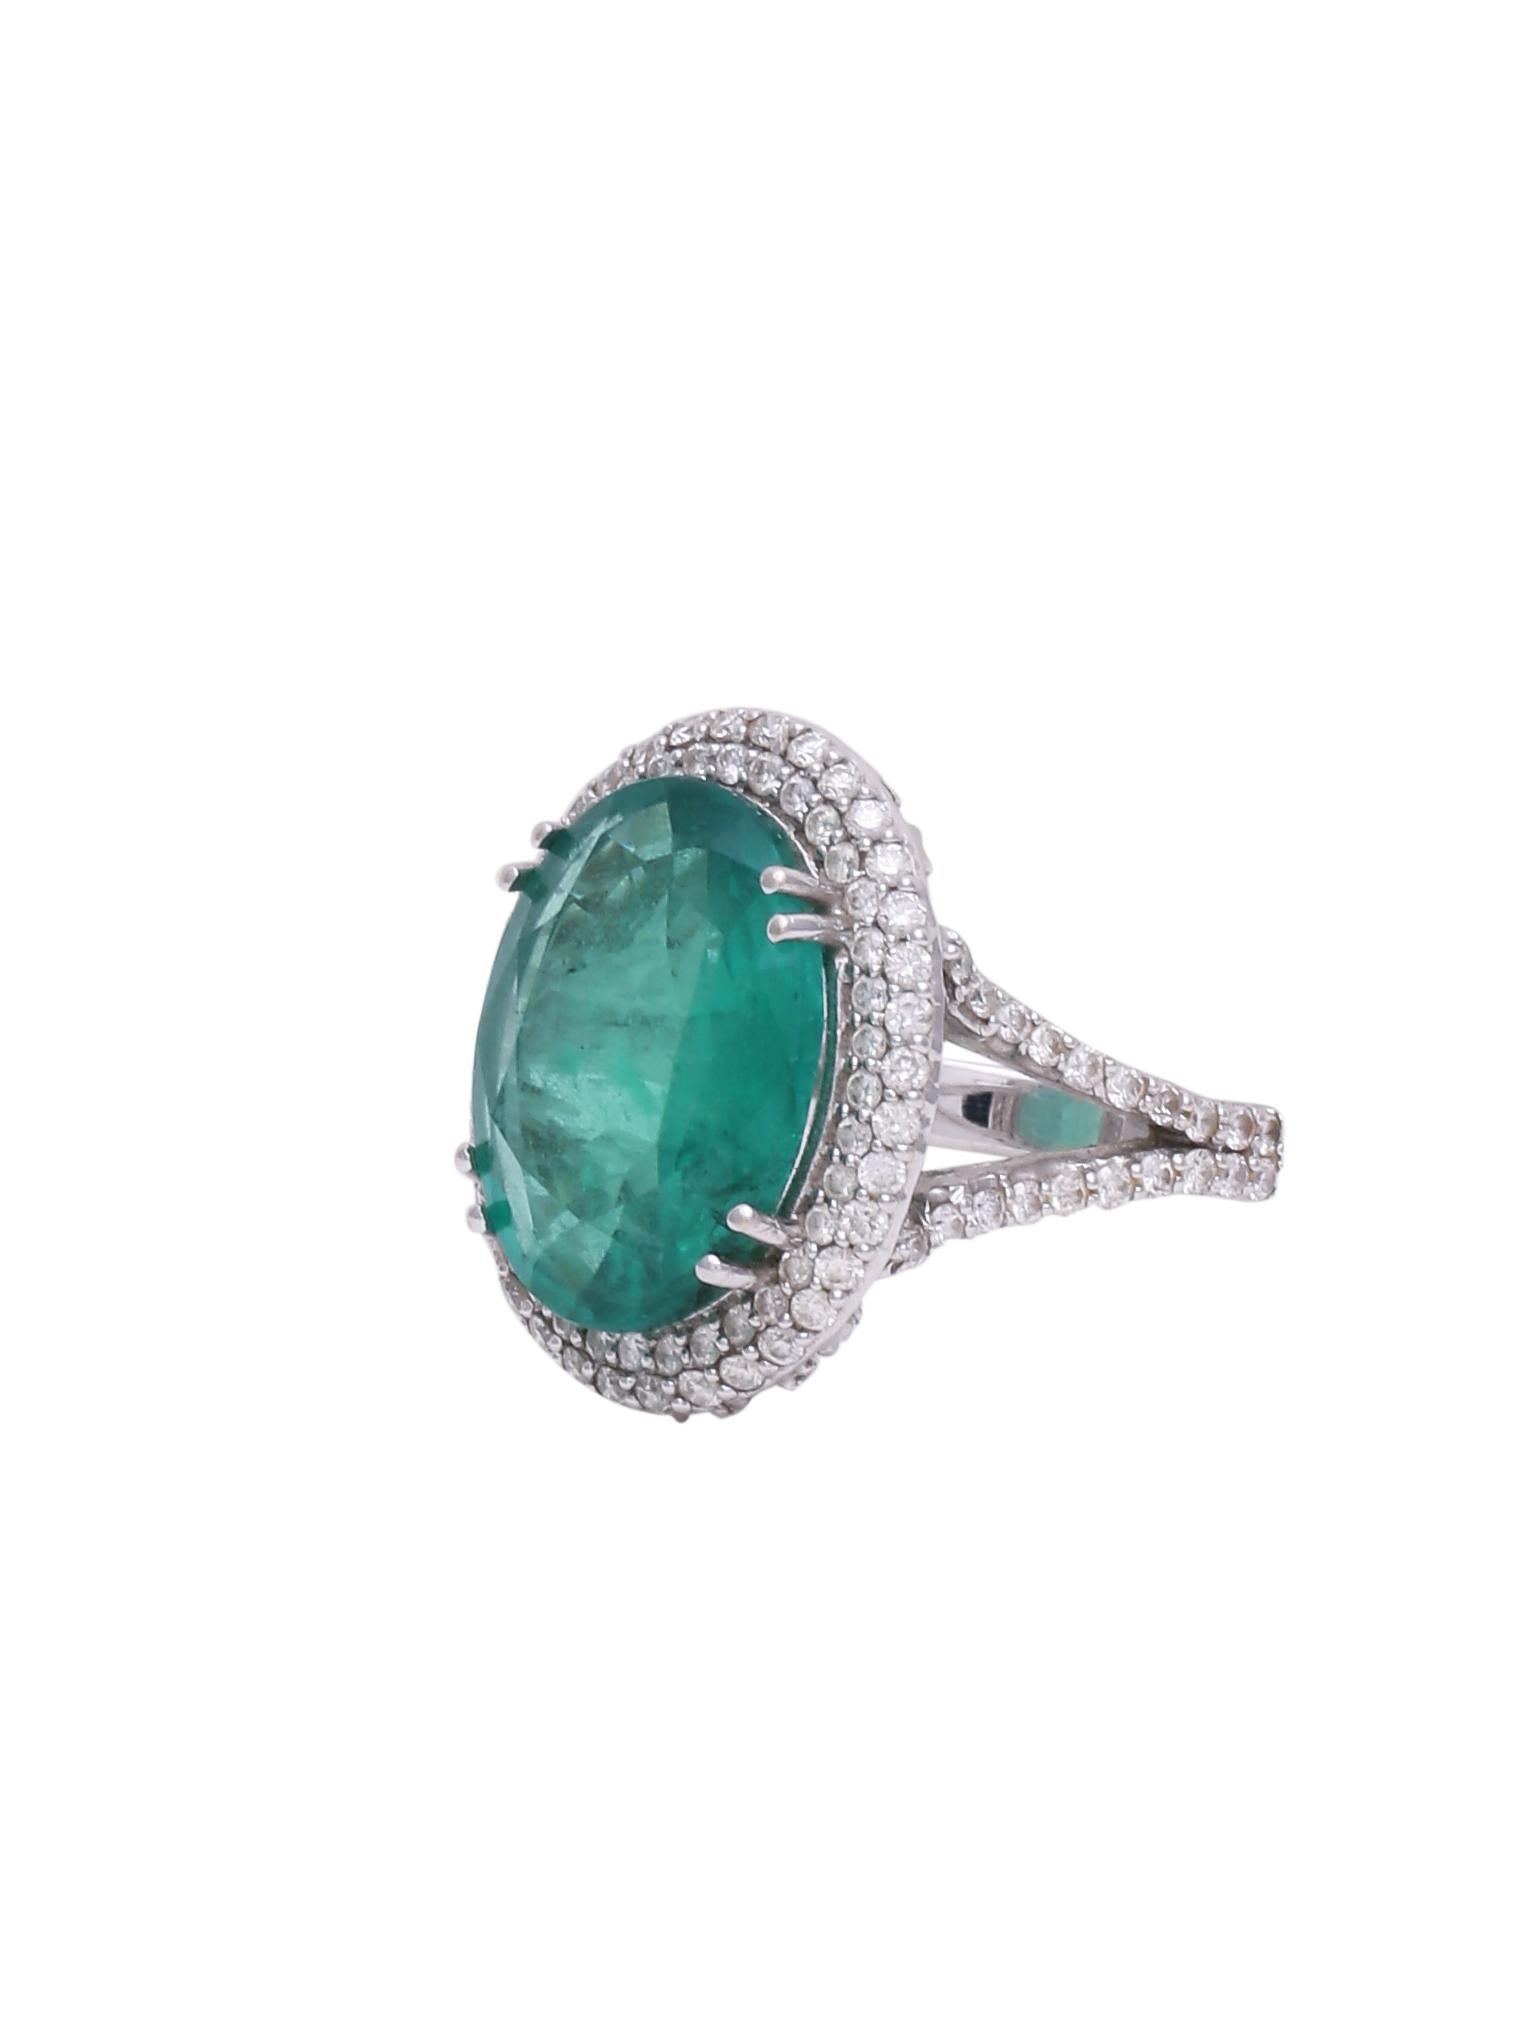 A classic ring with an Oval cut Zambian Emerald weighing 6.66cts surrounded with fine quality white diamonds set in 18K White gold. The Emerald is certified from a credible Indian Laboratory.
Emerald is the Birthstone the month of May and is